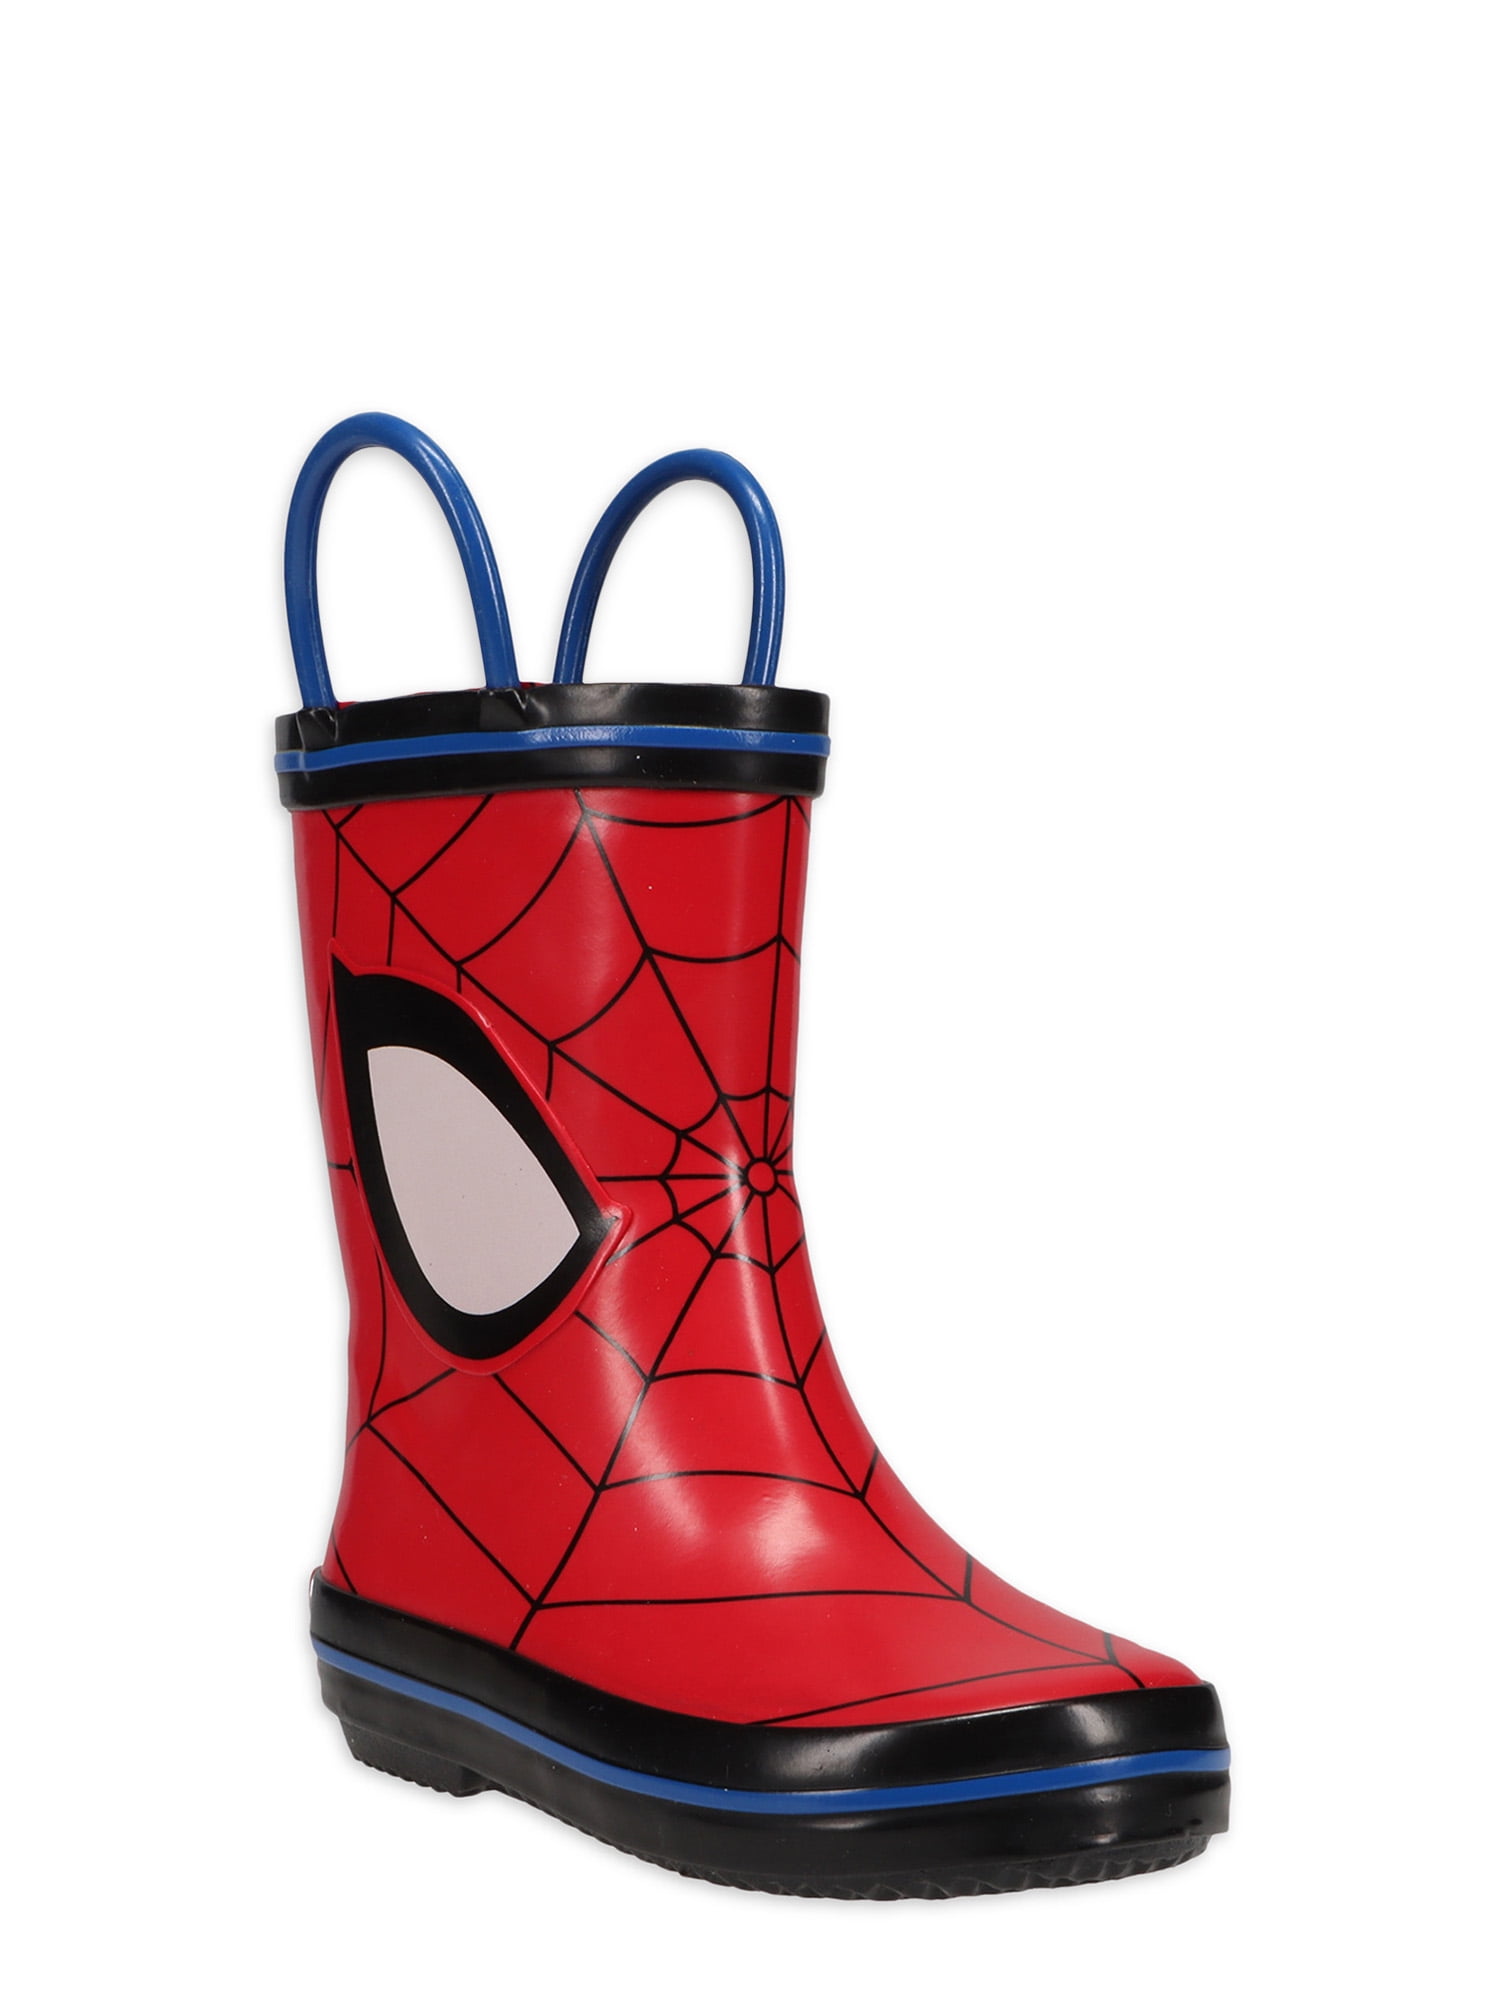 Spiderman Boys Rubber Wellies in Black and Red 